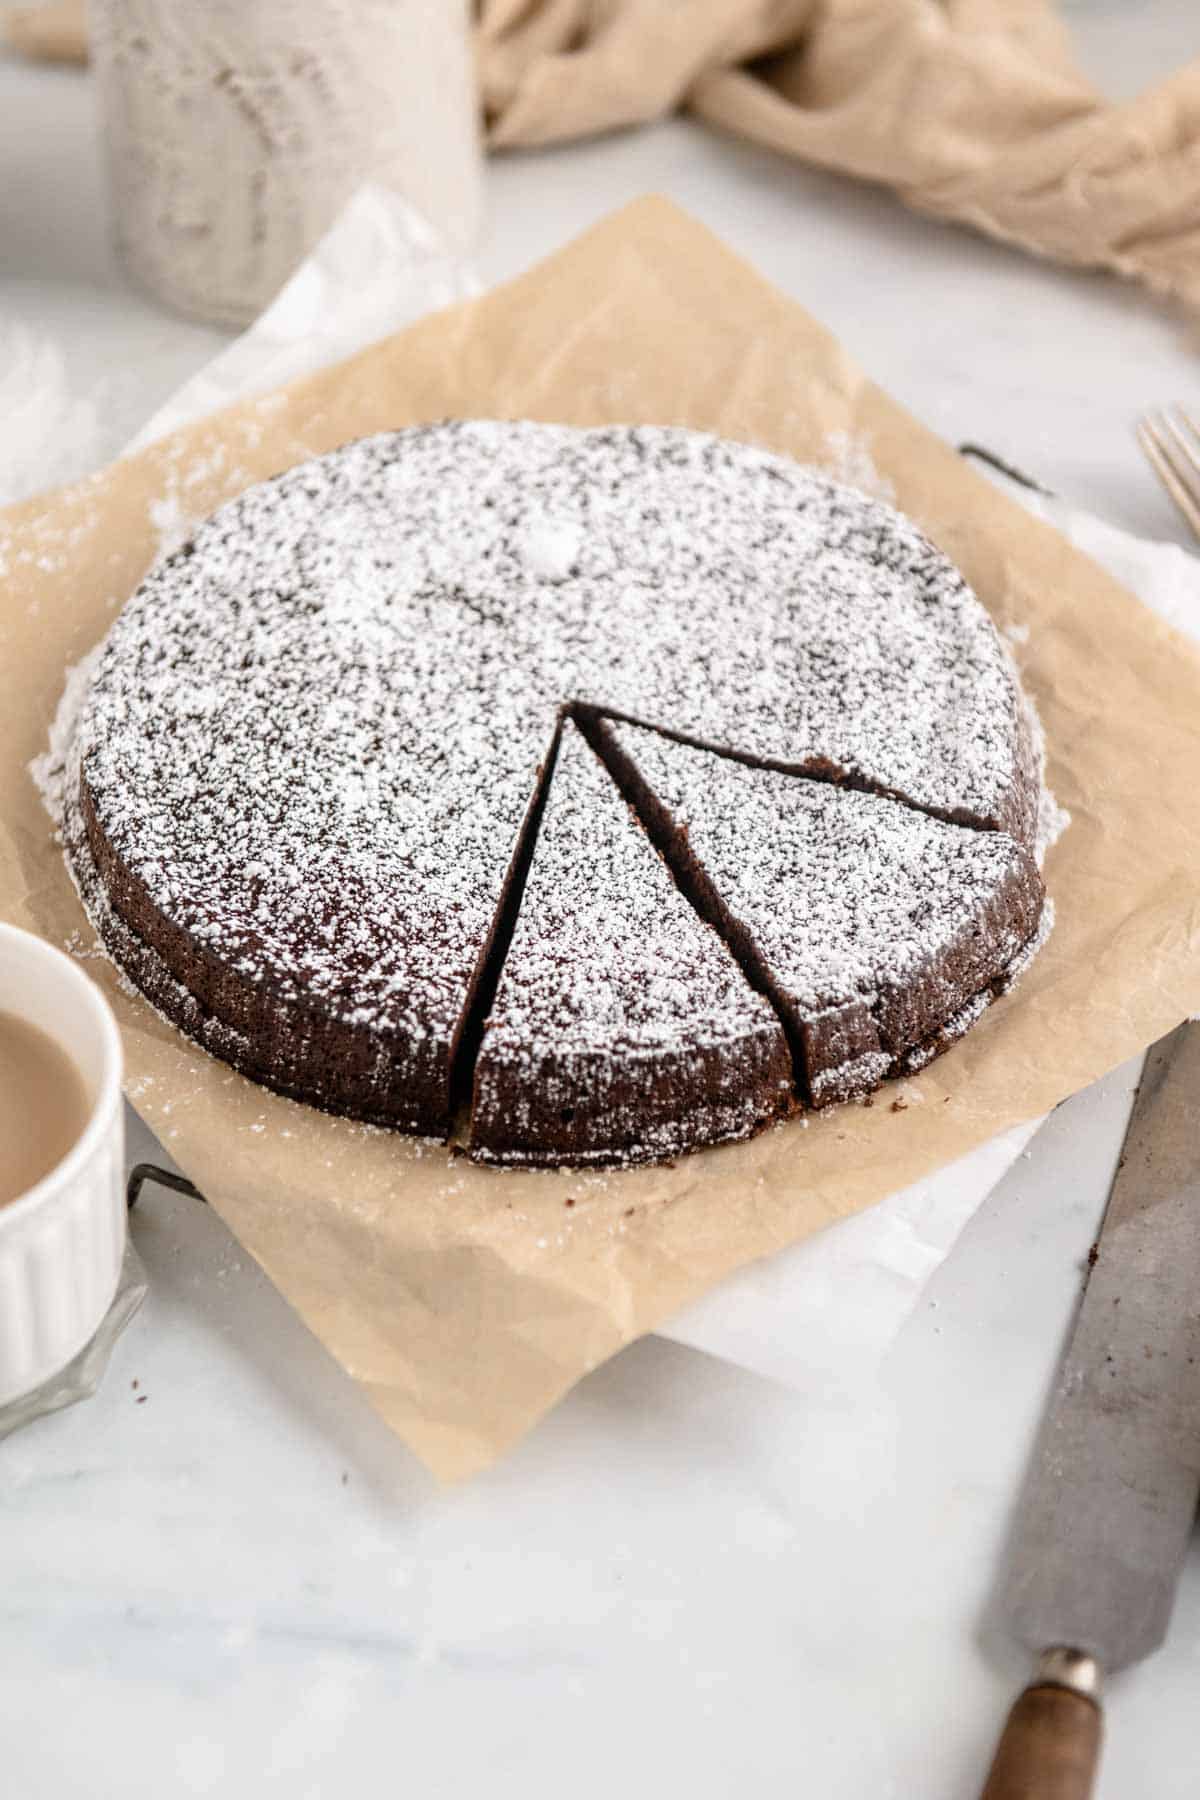 Overhead view of a flourless chocolate torte dusted with powdered sugar, with two slices cut out.